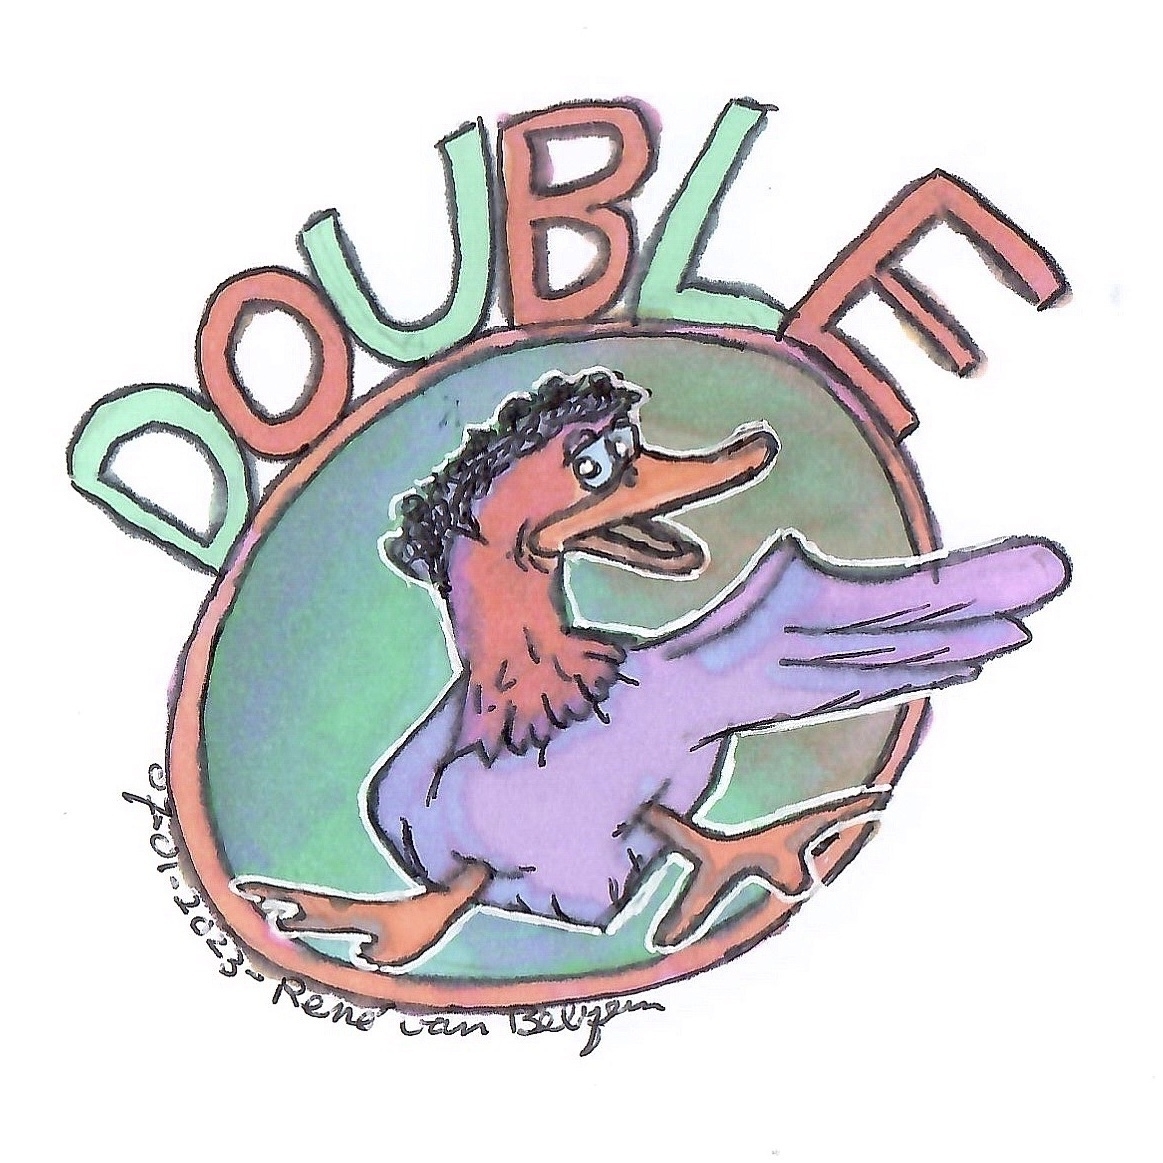 double-o-duck logo in ballpoint pen and markers